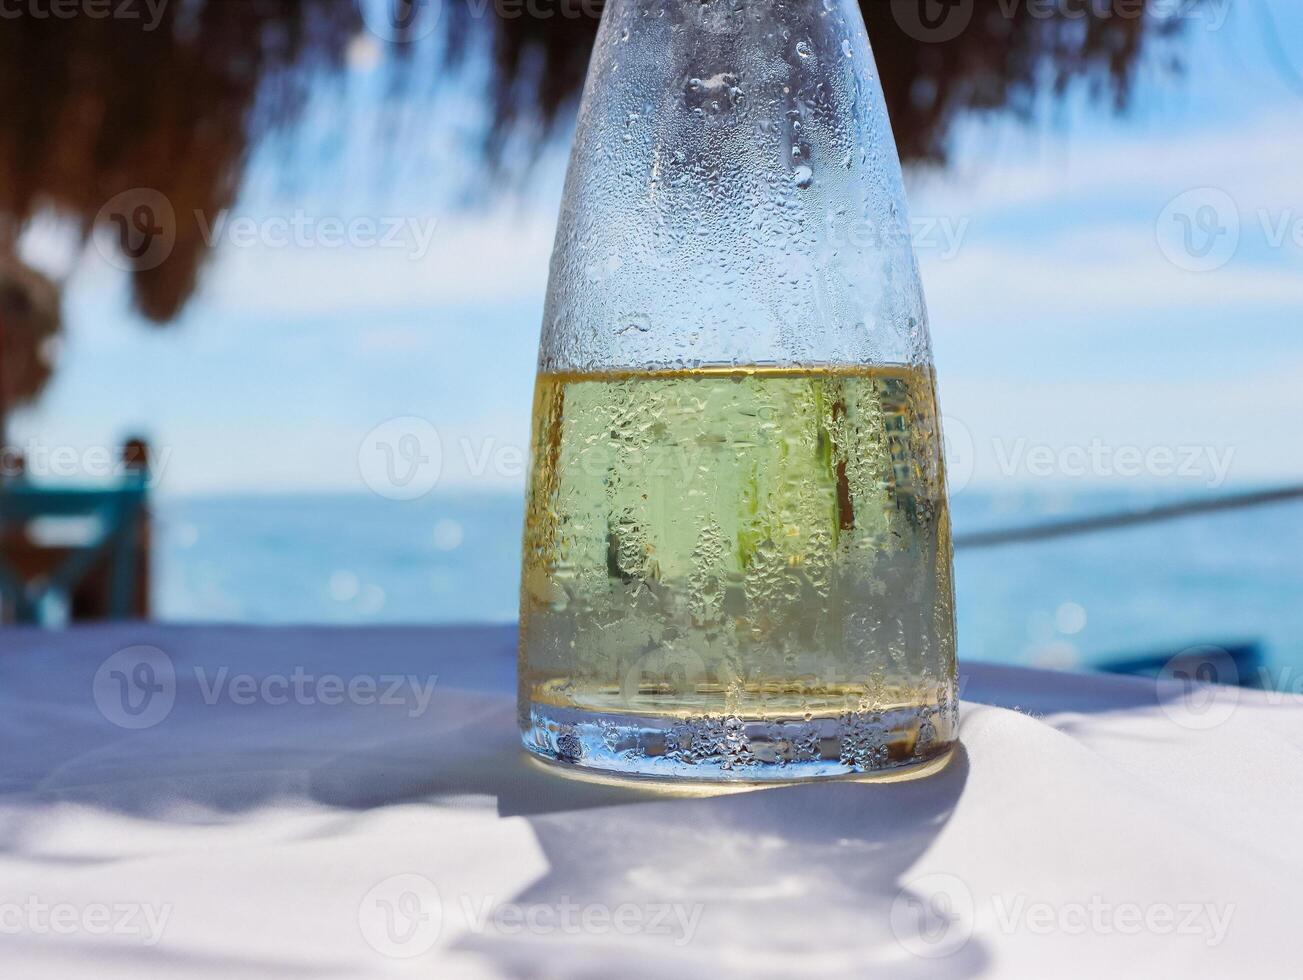 Fresh fruit water in a glass pitcher on the table in the restaurant at the sea shore. Ice cold lemonade at the beach. Detail of the bottle. Drops of water. Blue sky and sea on the background. Close-up photo